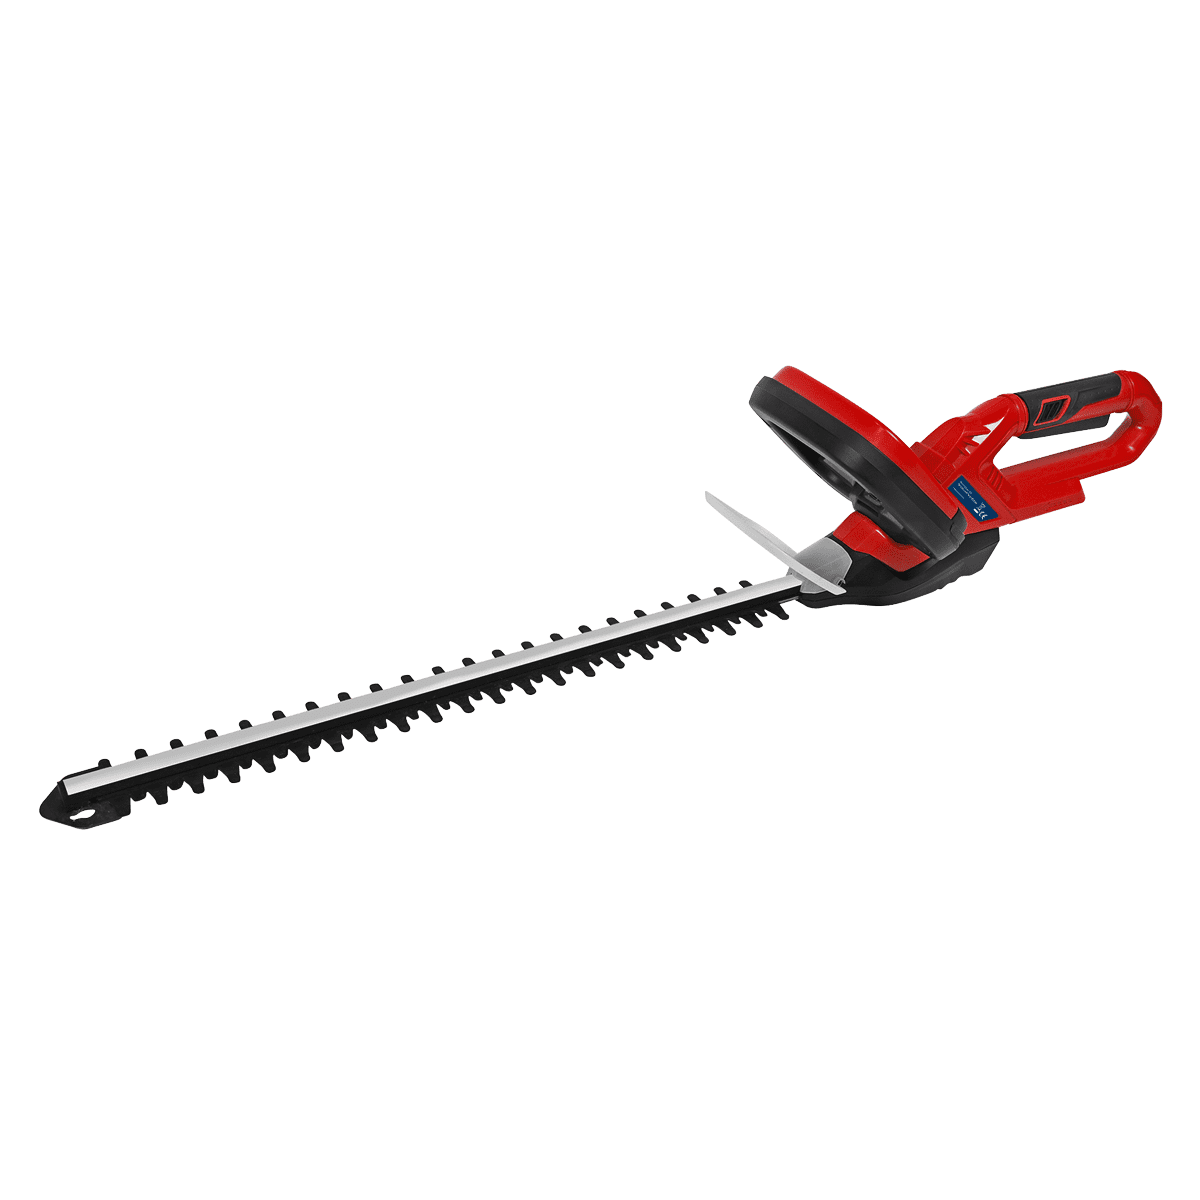 520mm Hedge Trimmer Cordless 20V - Body Only - UK Tool Store